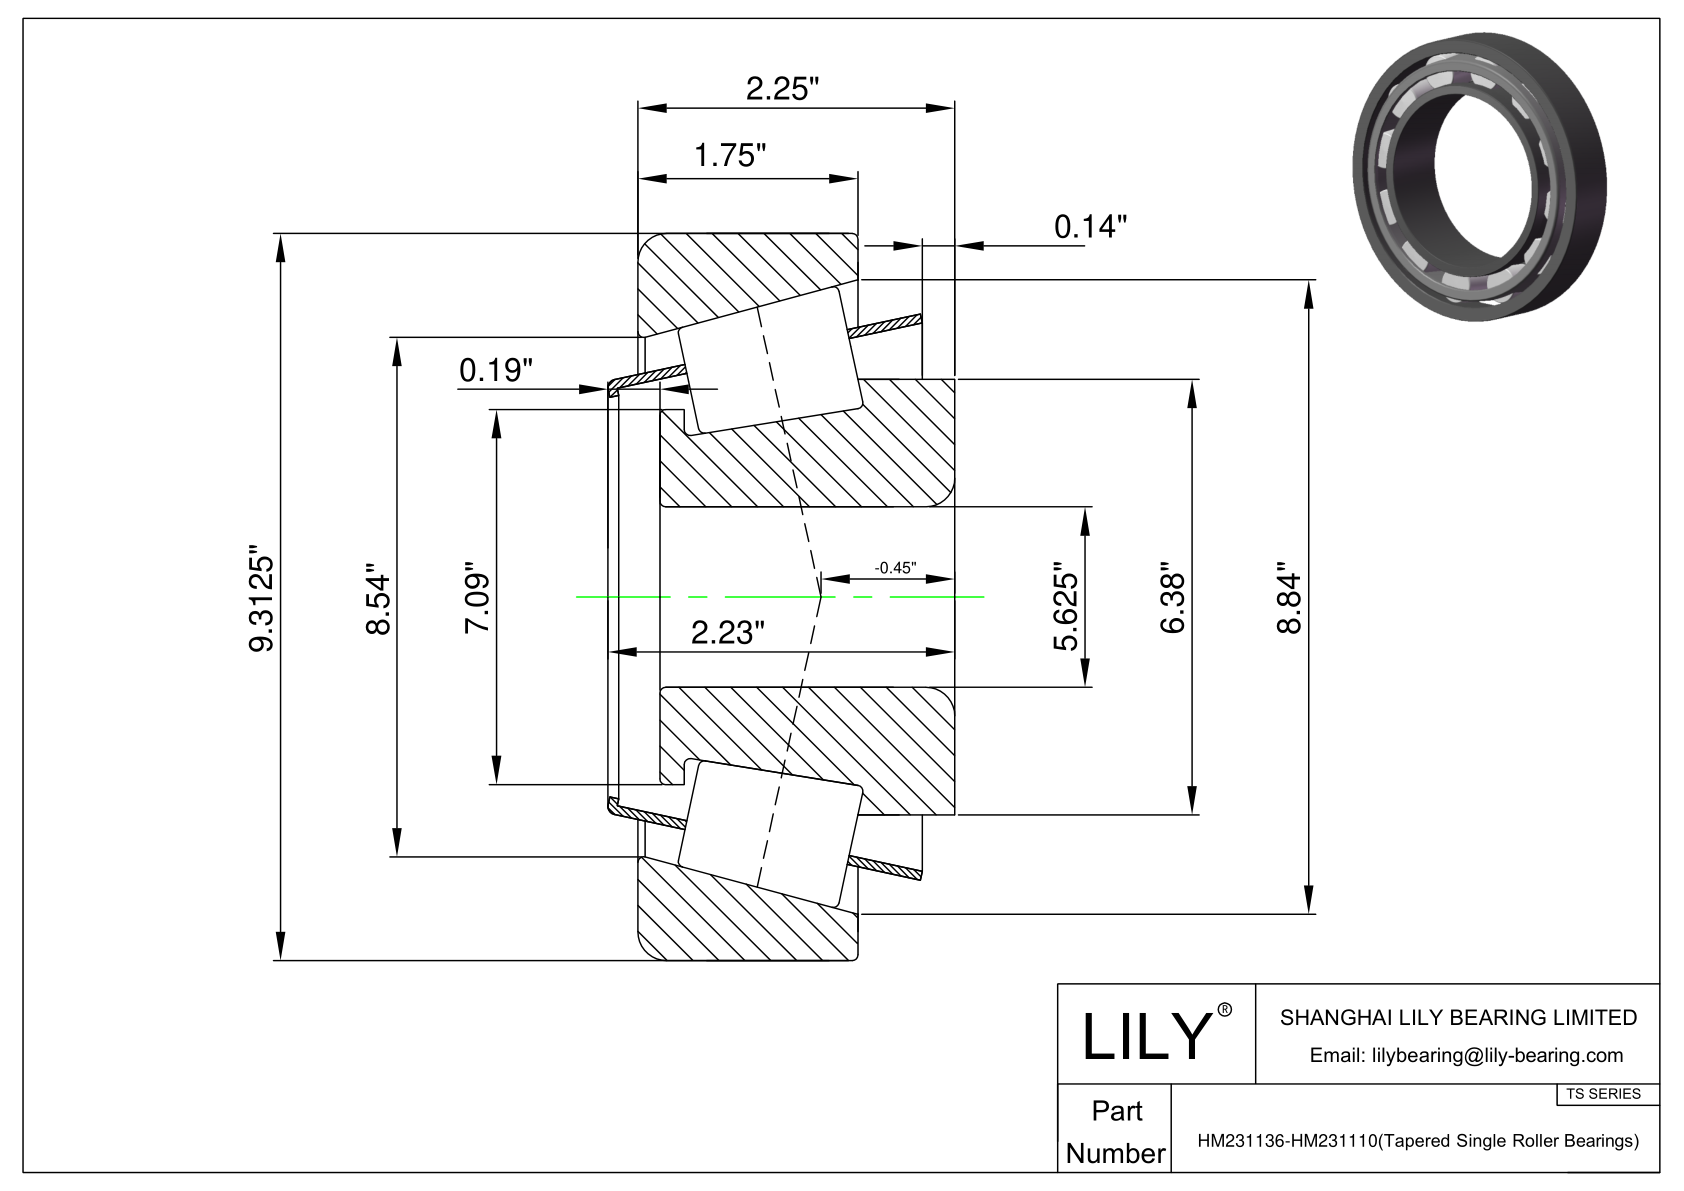 HM231136-HM231110 TS (Tapered Single Roller Bearings) (Imperial) cad drawing